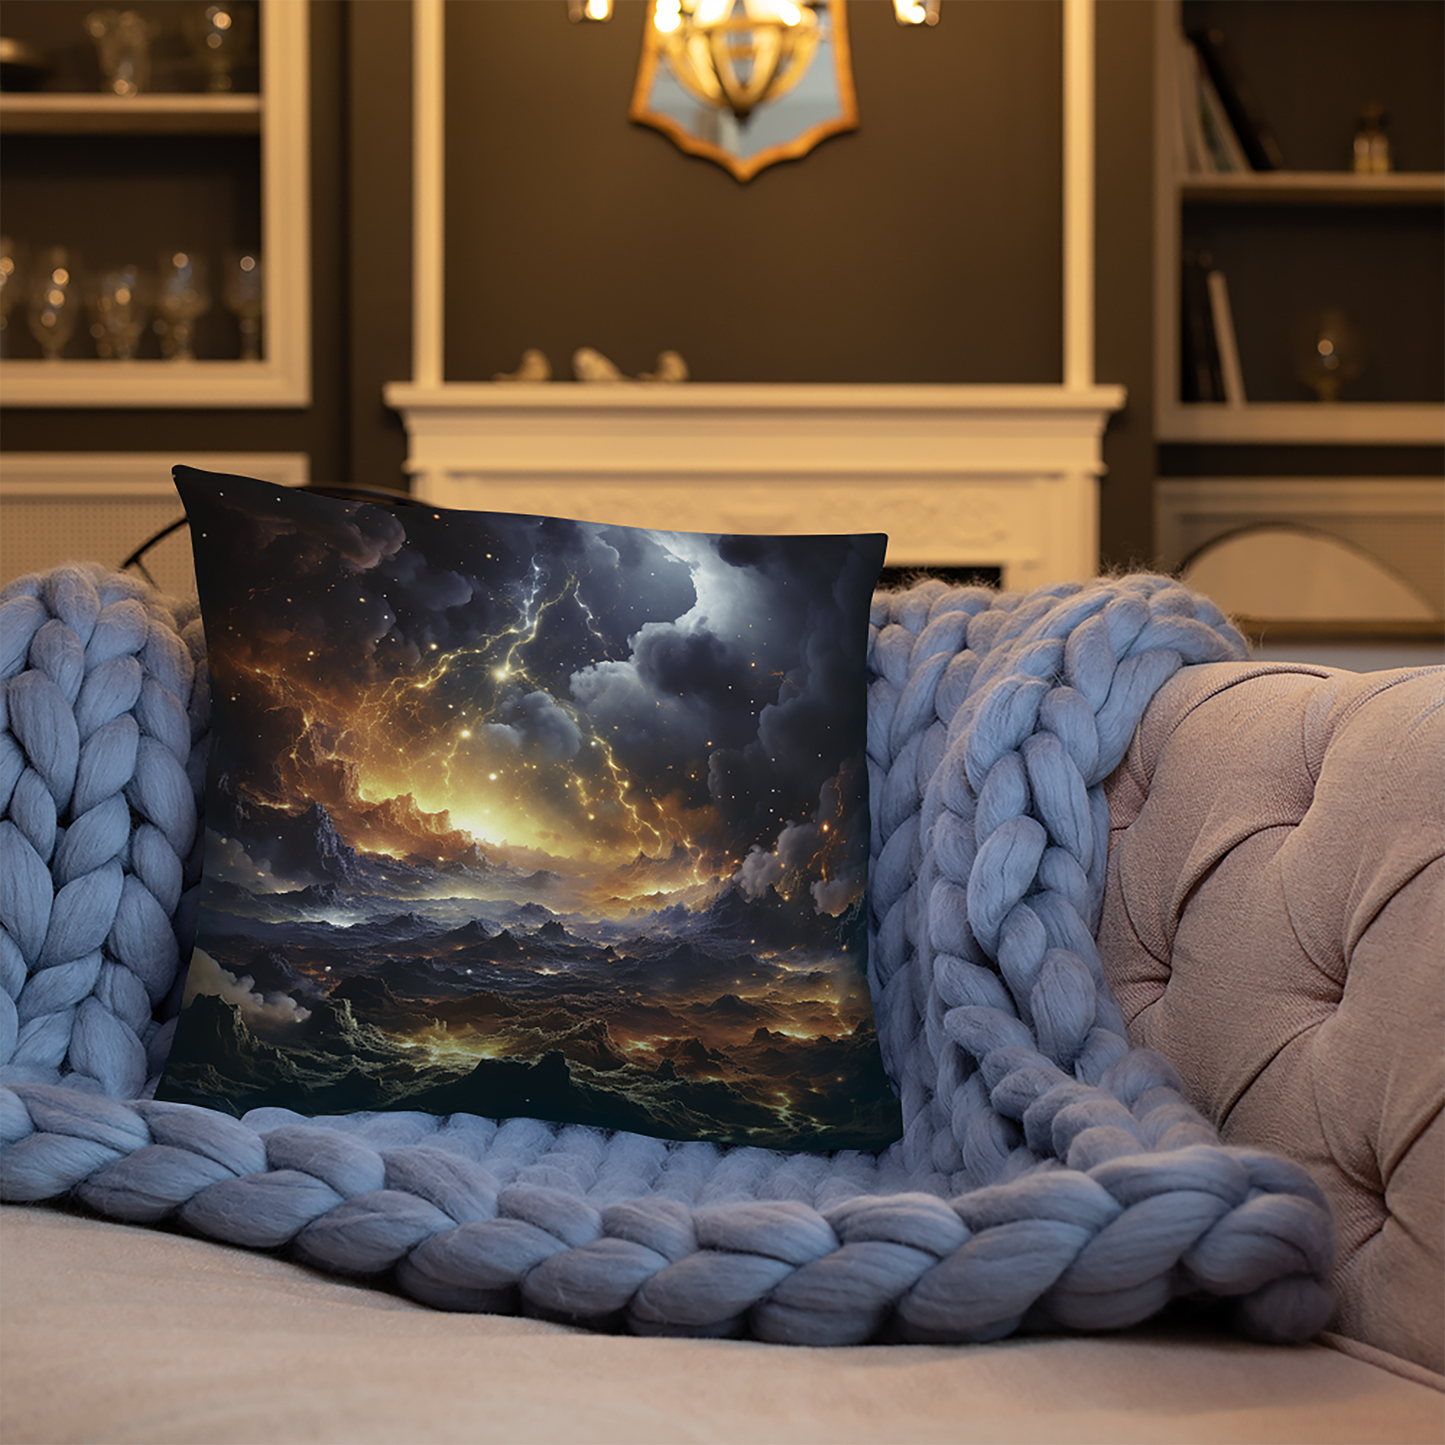 Space Throw Pillow Epic Fantasy Deep Space Polyester Decorative Cushion 18x18